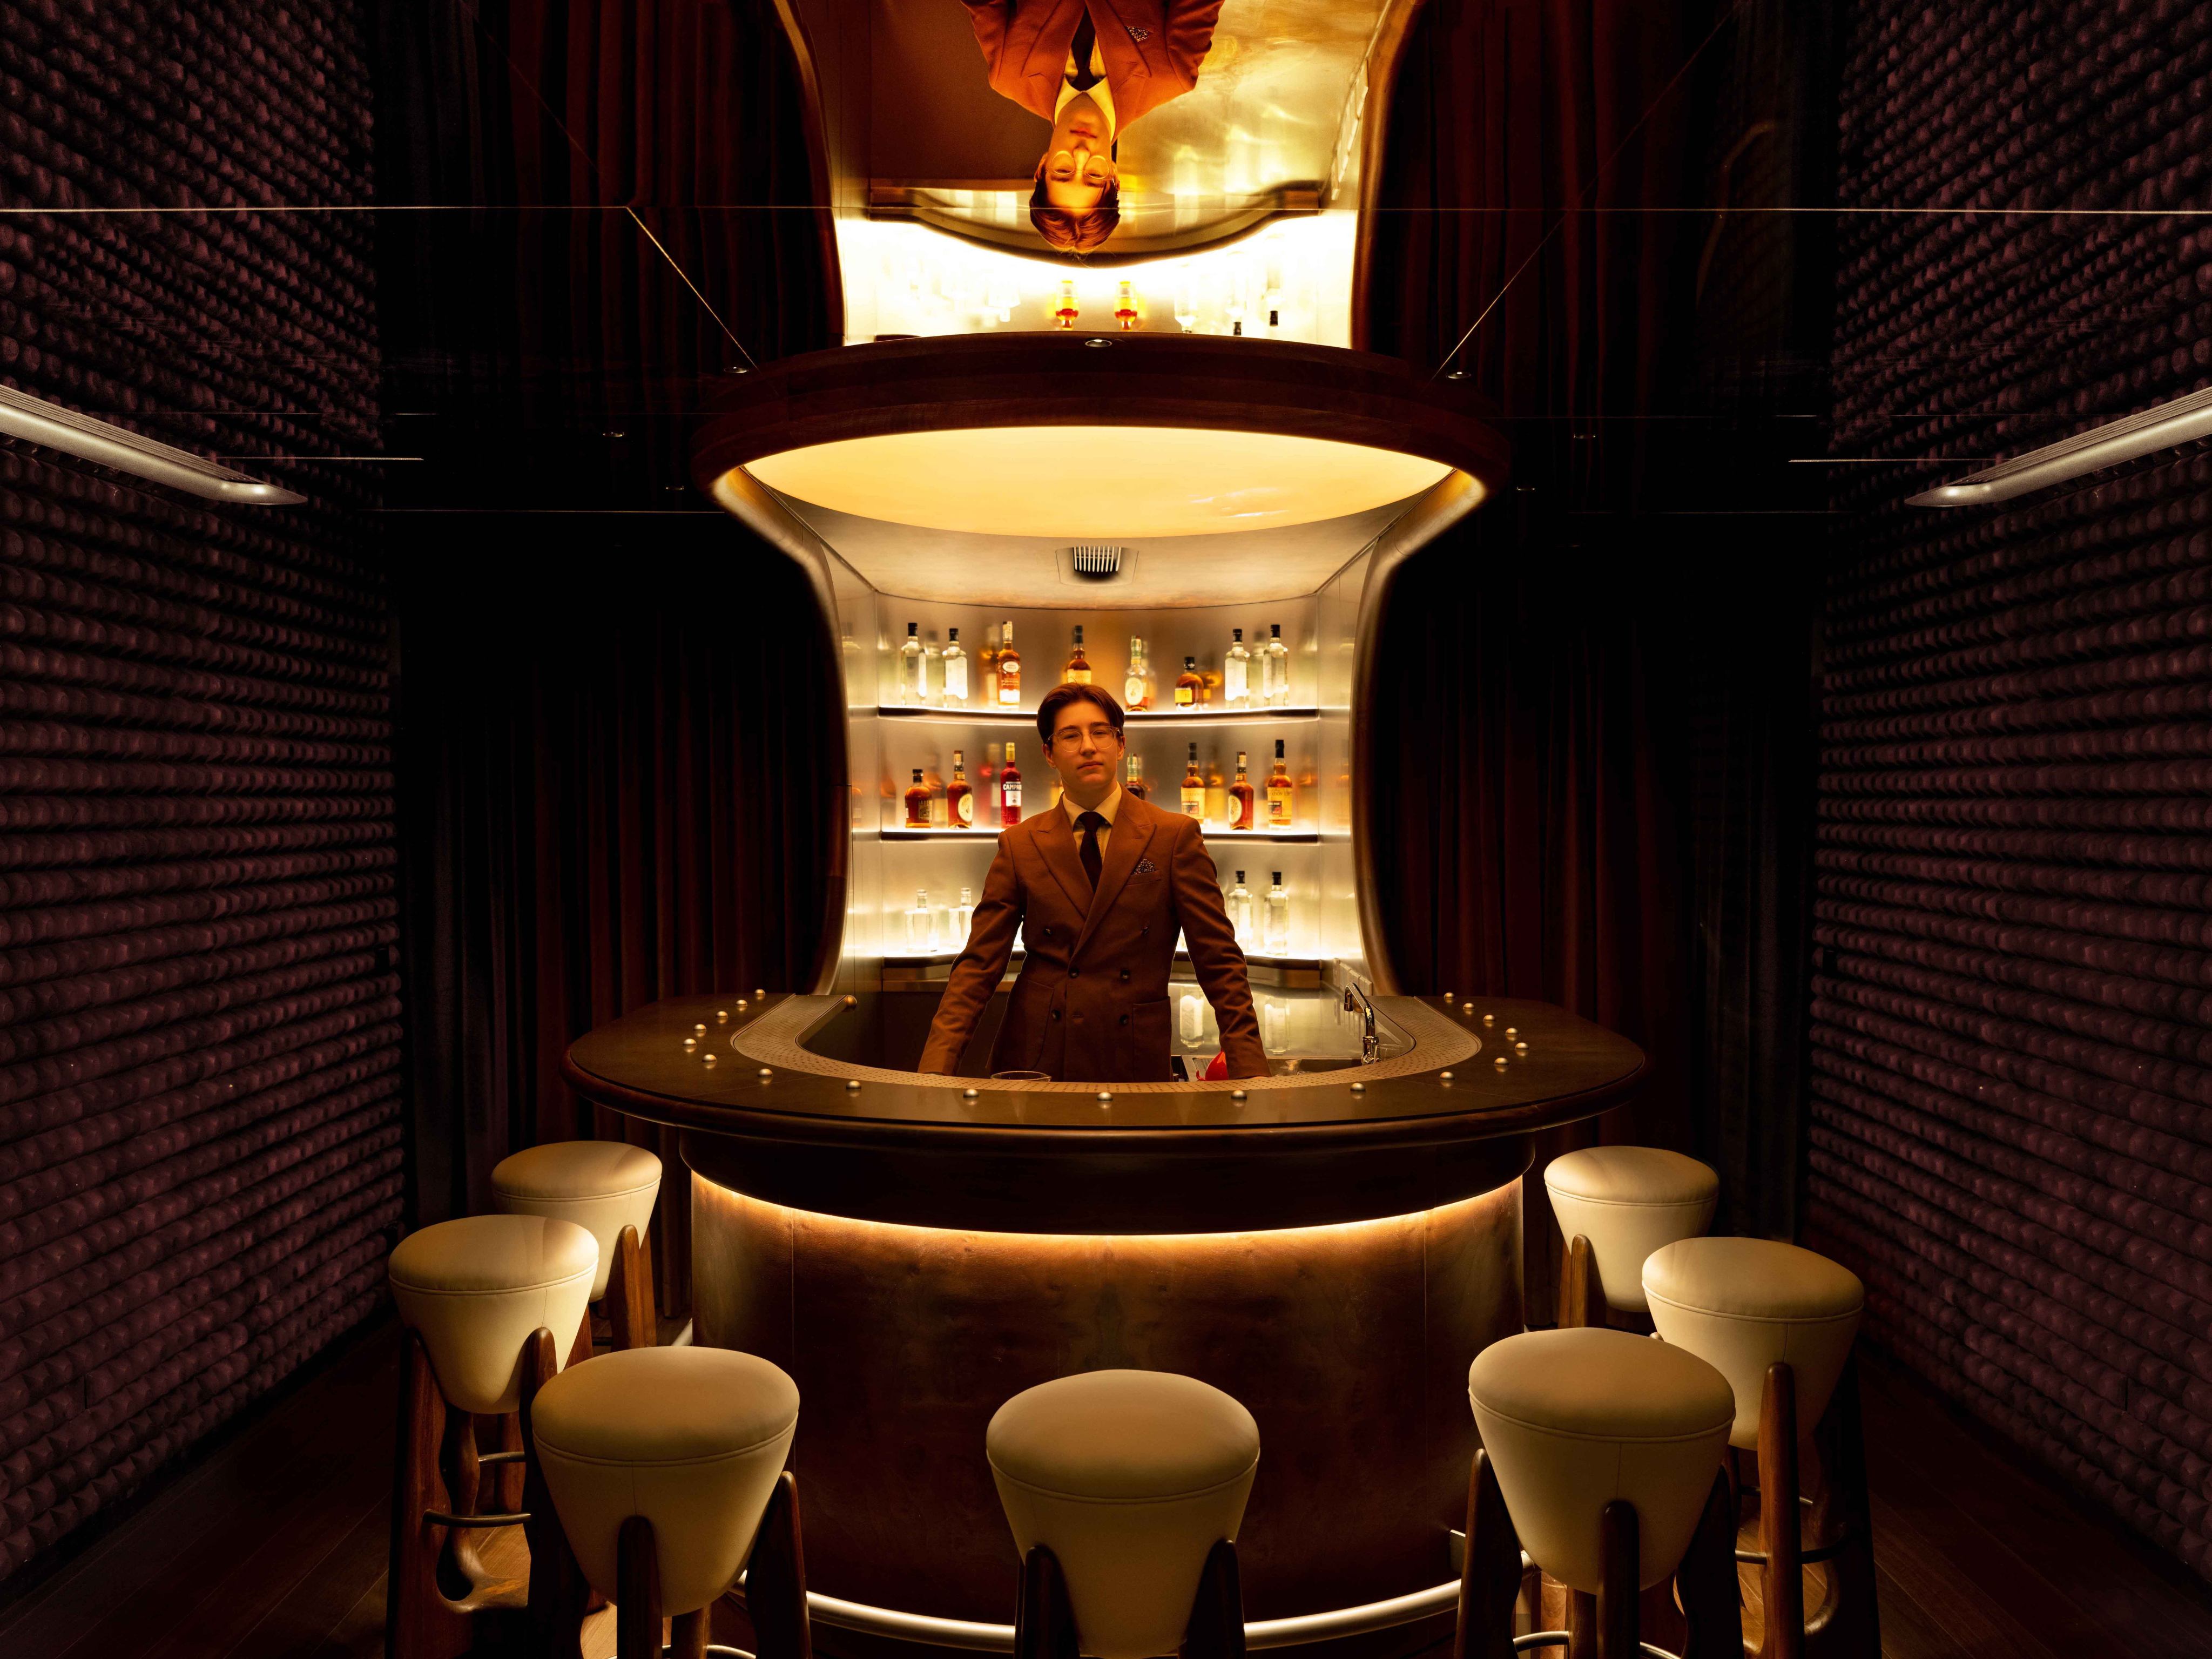 Artifact, in Central, is a futuristic take on a cocktail bar and one of a string of new openings shaking up the Hong Kong nightlife scene. Photo: NCDA
